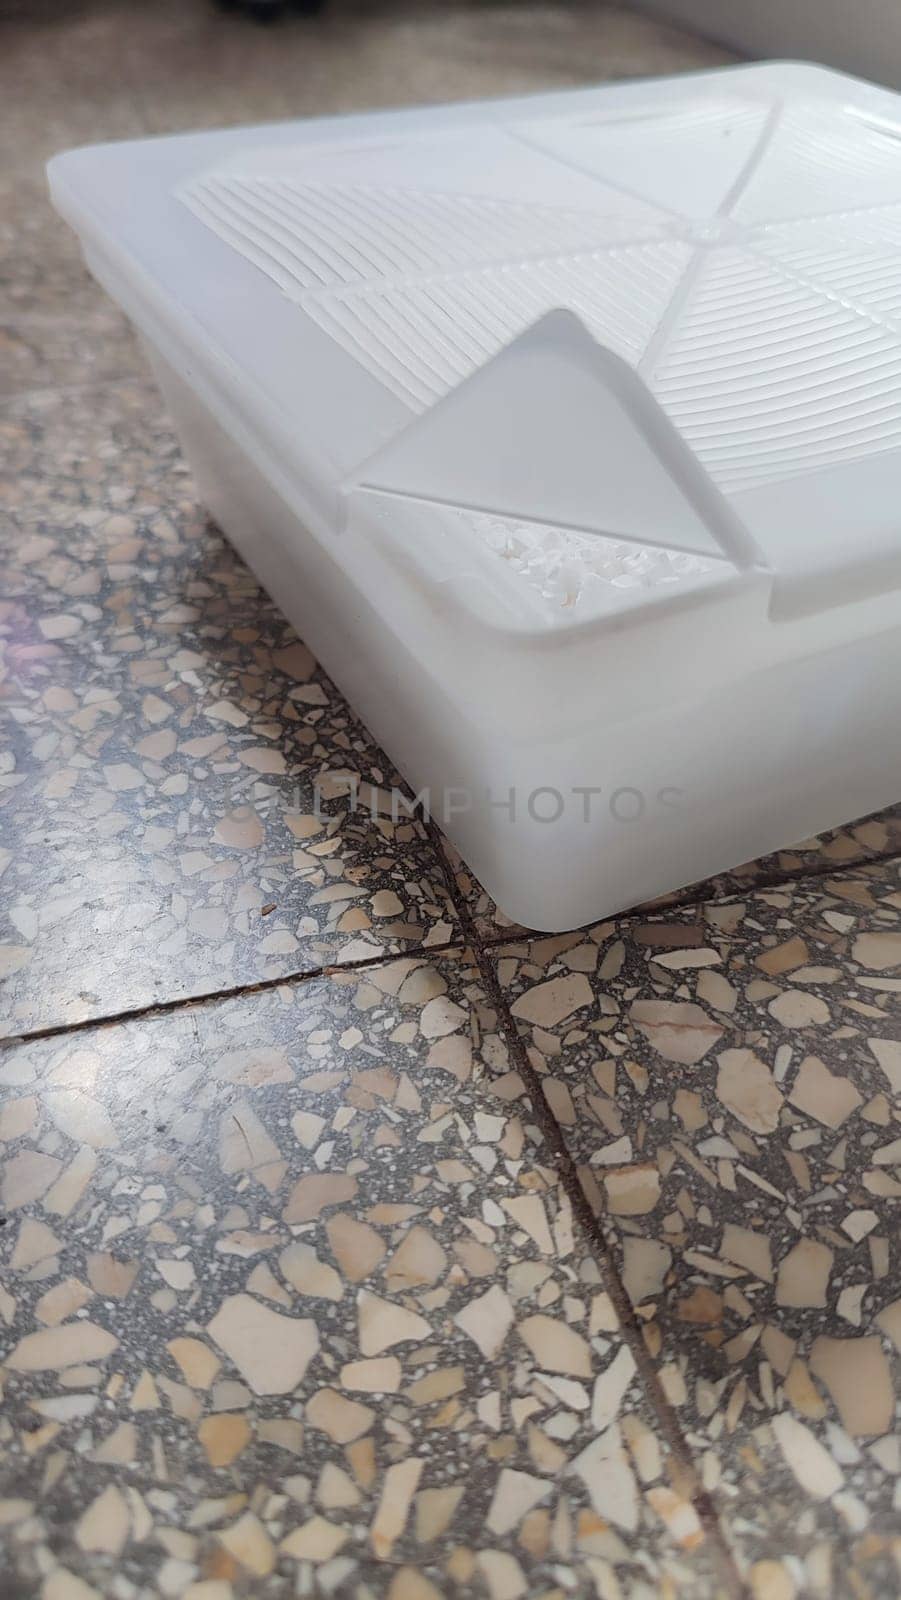 white plastic container, moisture absorber by Ply